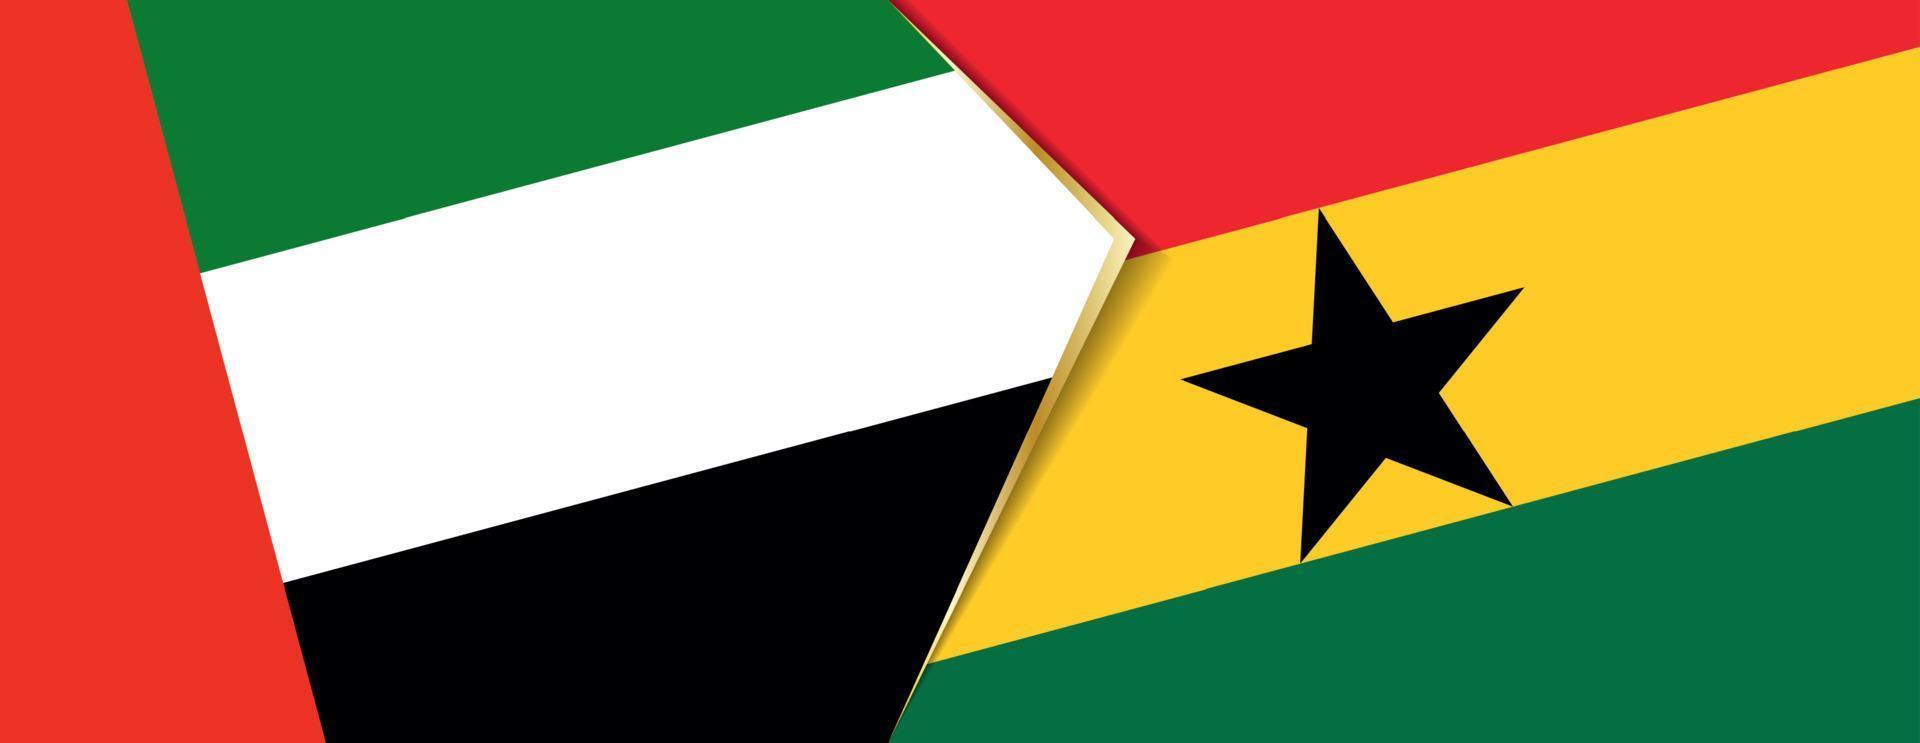 United Arab Emirates and Ghana flags, two vector flags.